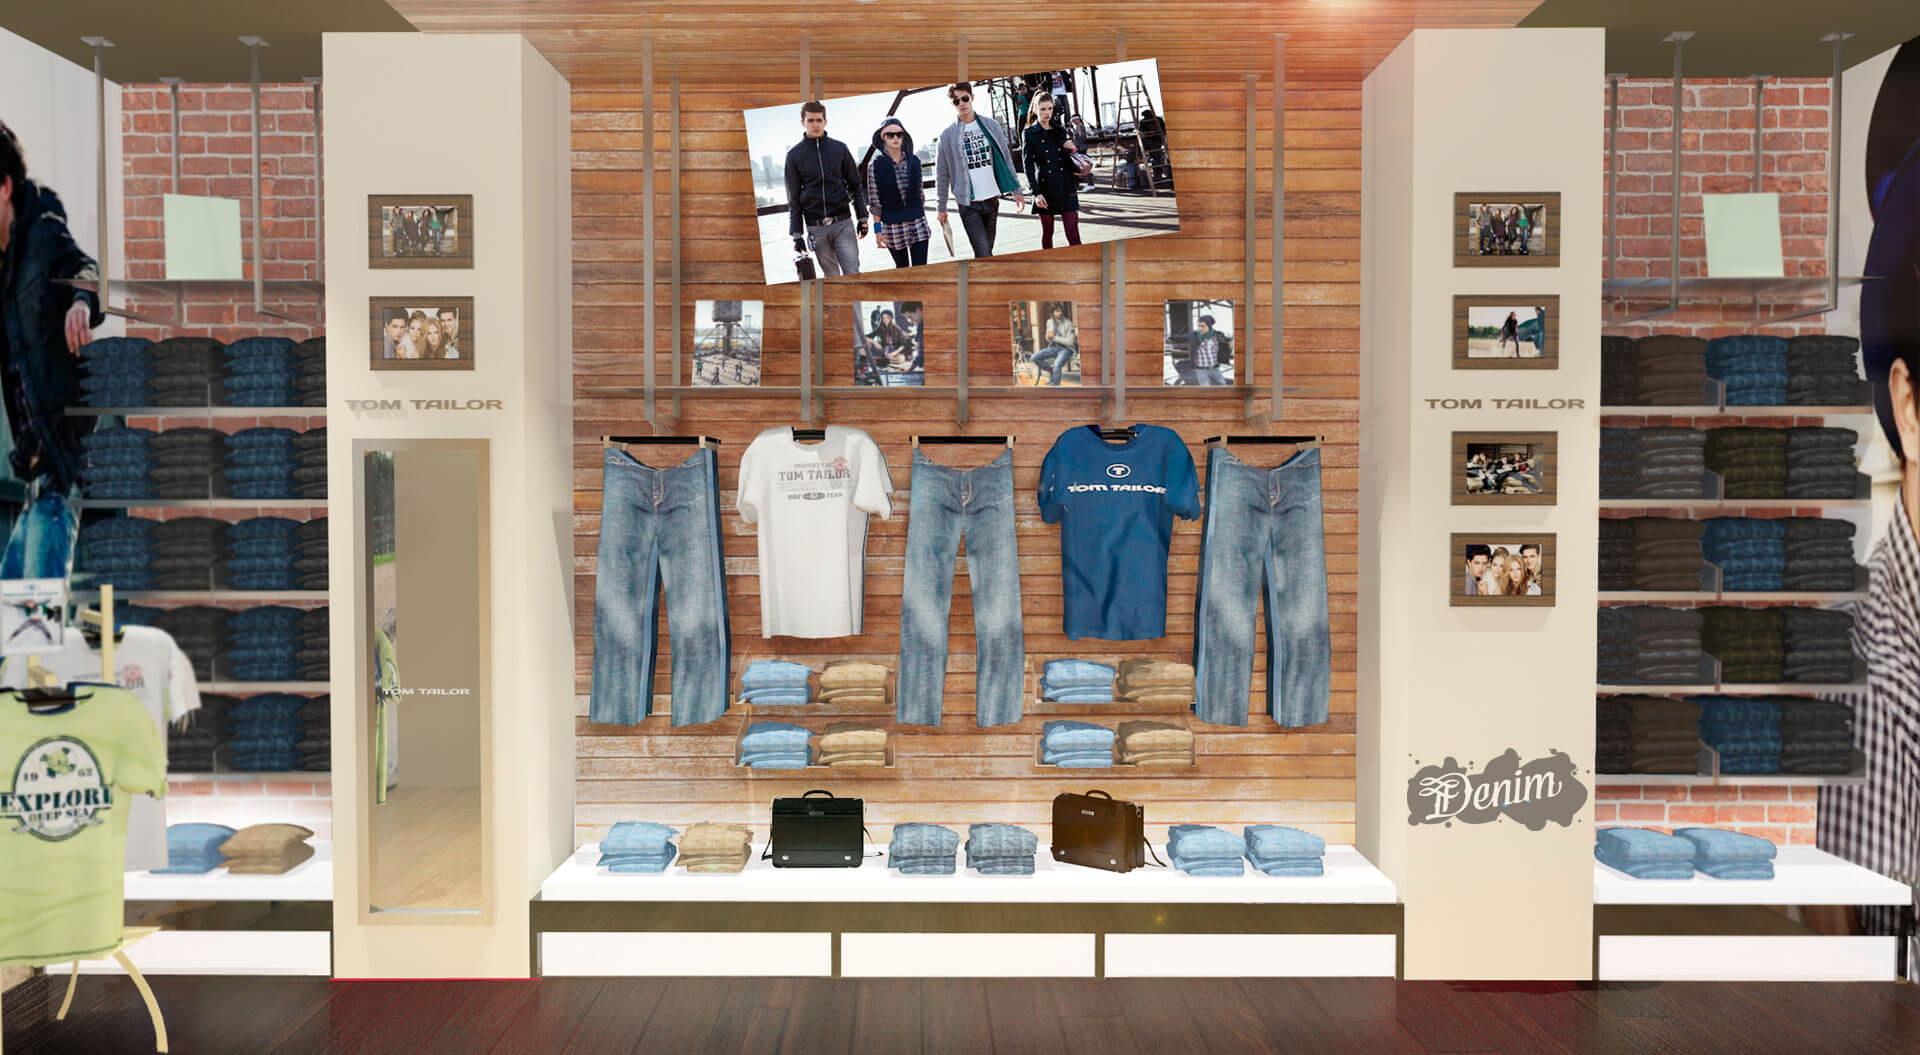 Tom Taylor Germany retail interior fashion store design, denim jeans department, new trends, ideas, brand communications